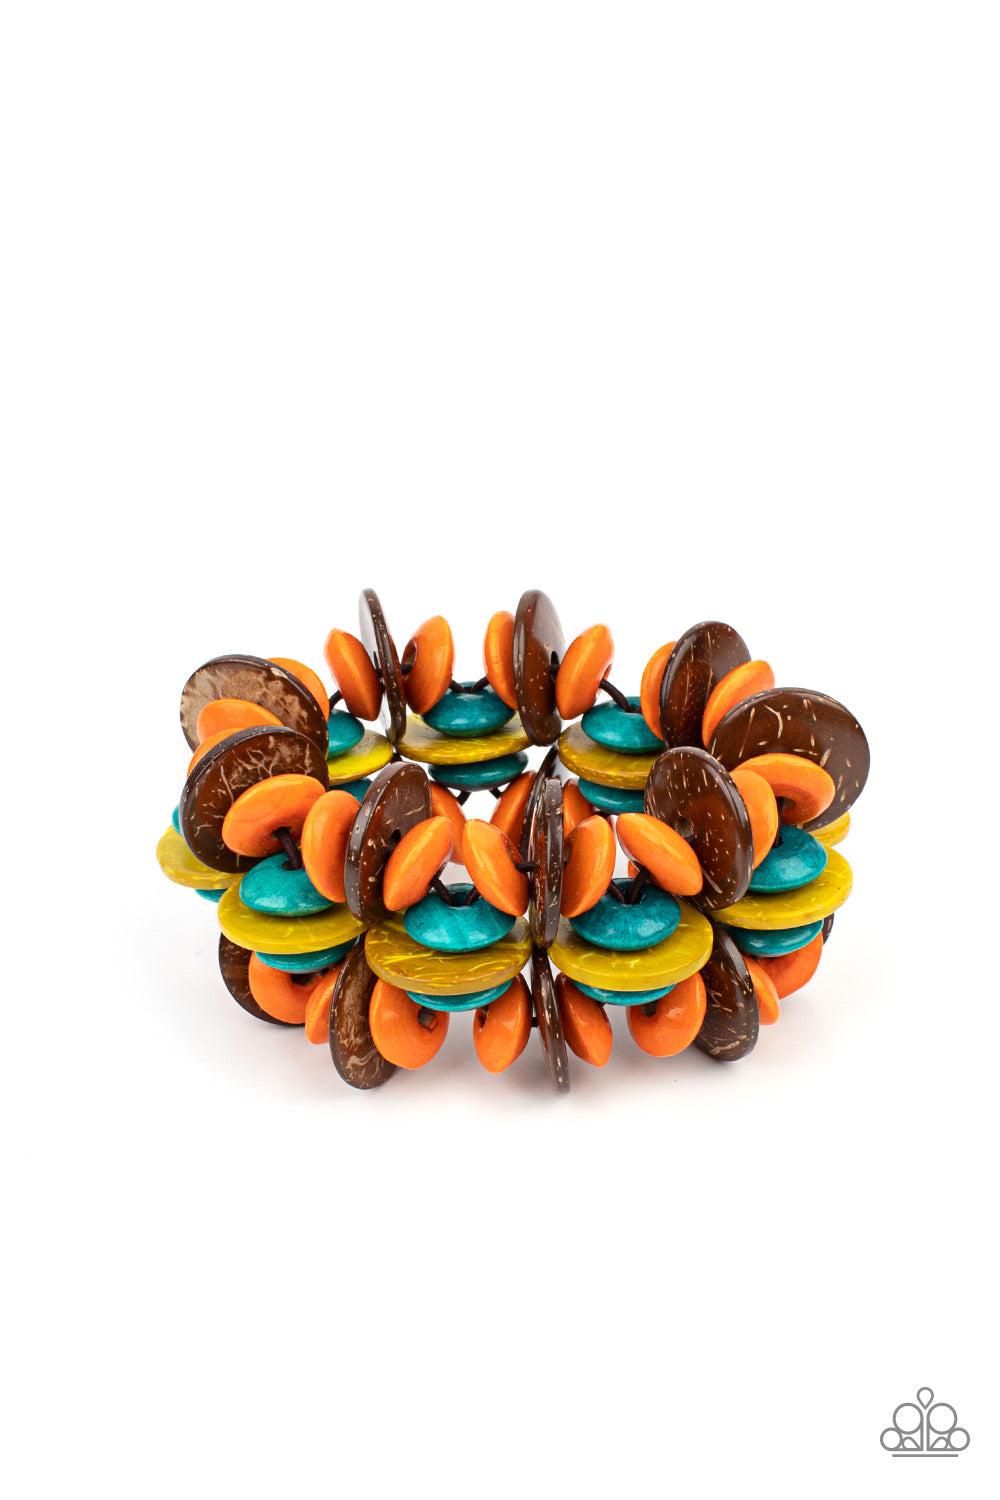 A colorful collection of brown, orange, yellow, and turquoise disc-shaped wooden beads are threaded along stretchy bands creating a tropical island vibe around the wrist.